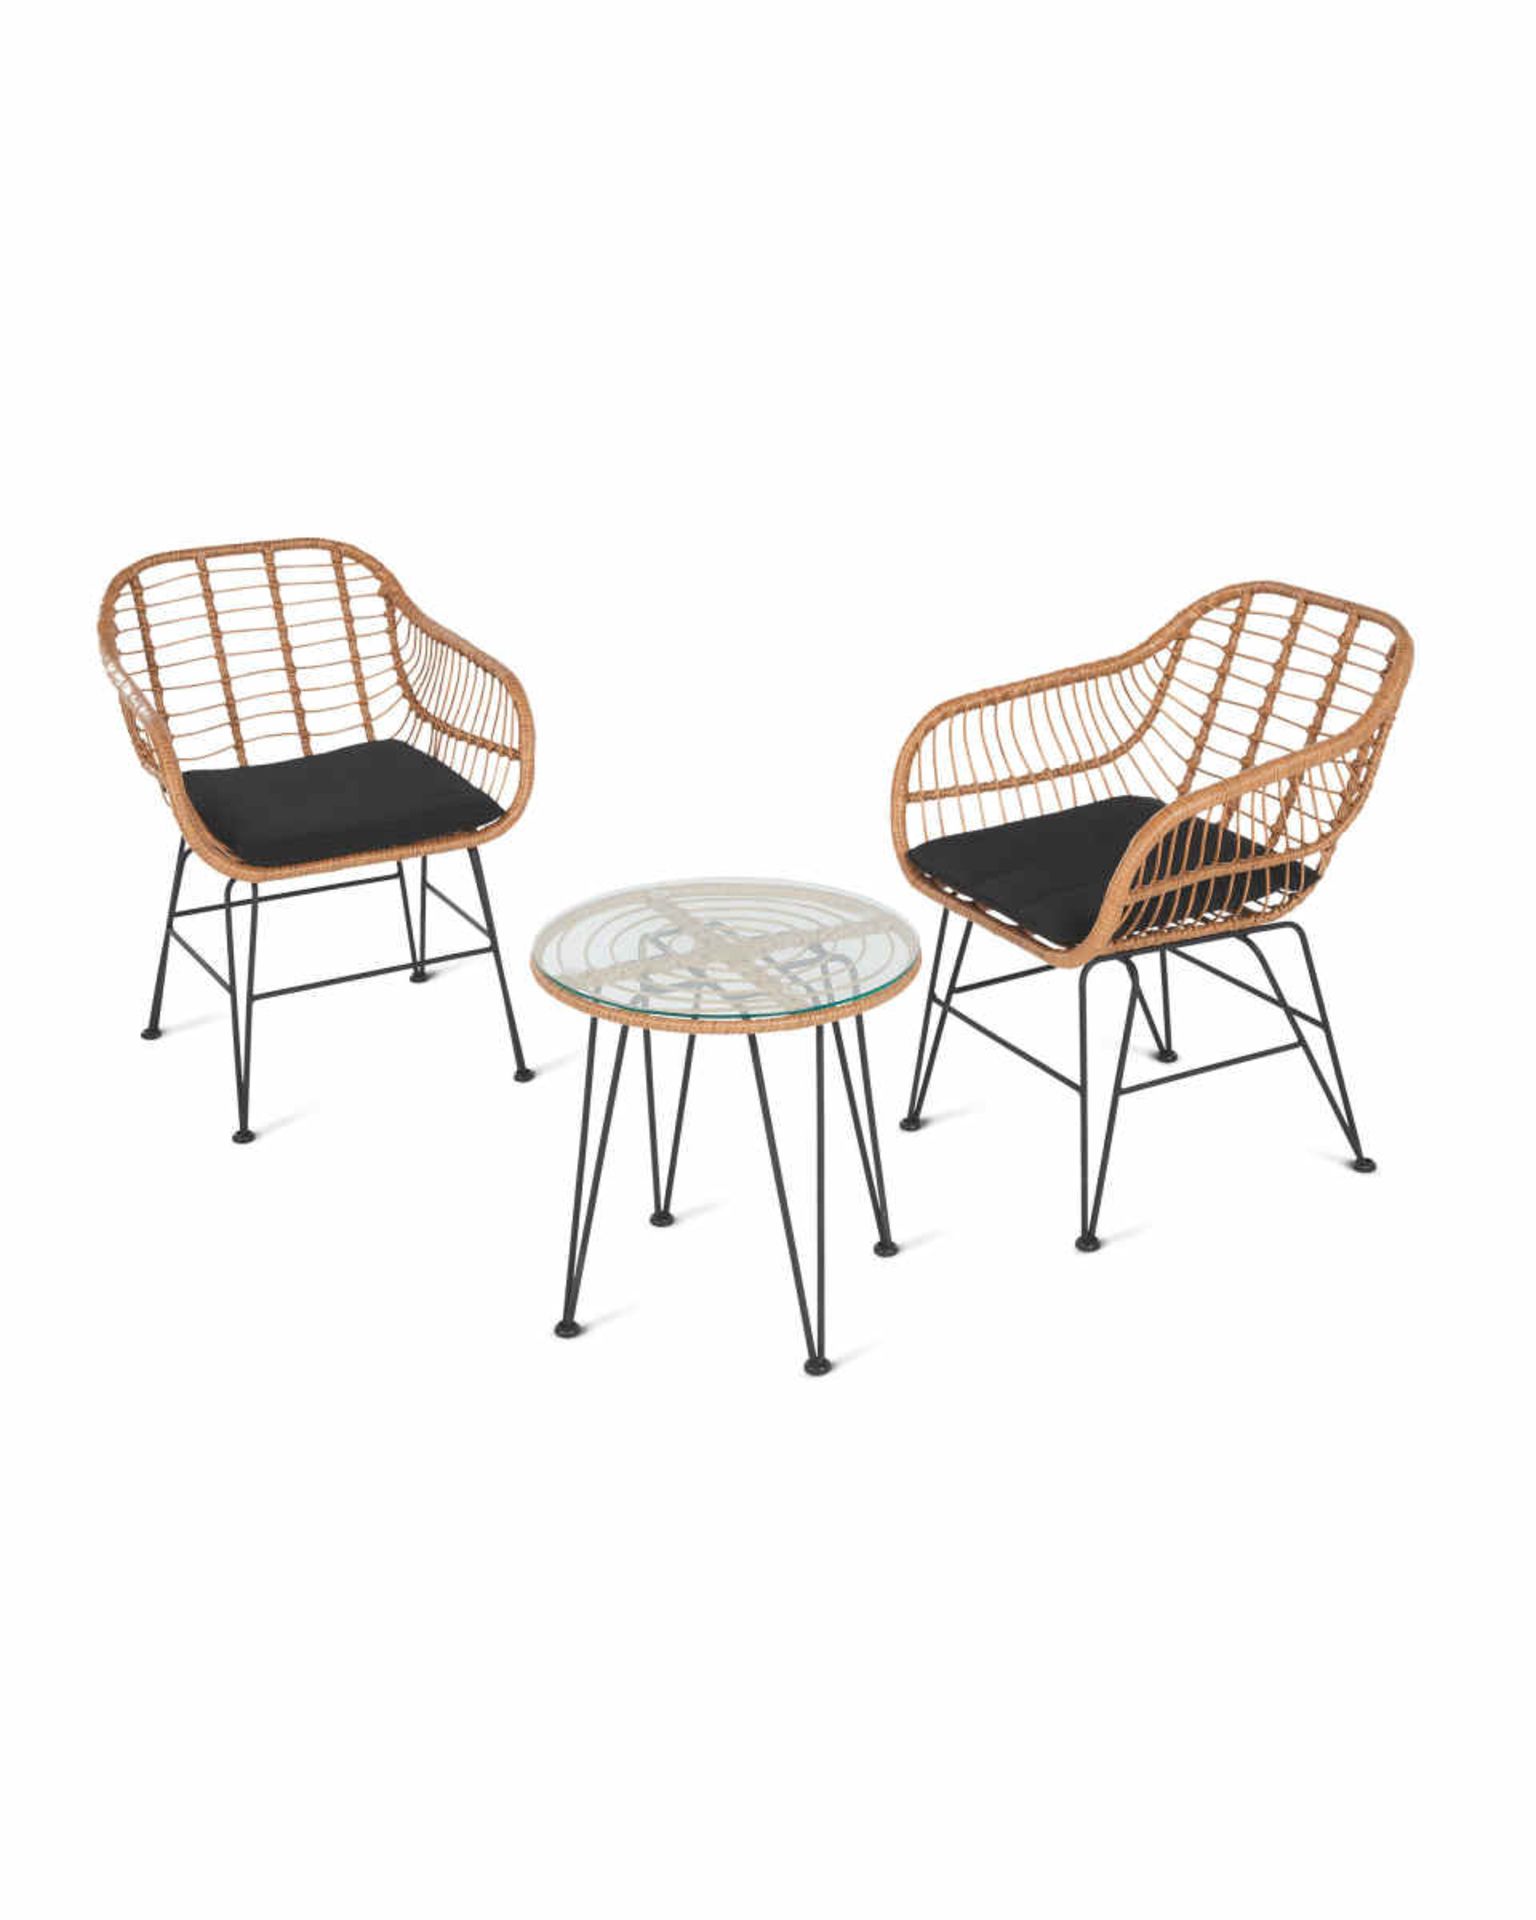 Bamboo Style Rattan Bistro Set. Enjoy your balcony view whilst relaxing on this stunning Deluxe